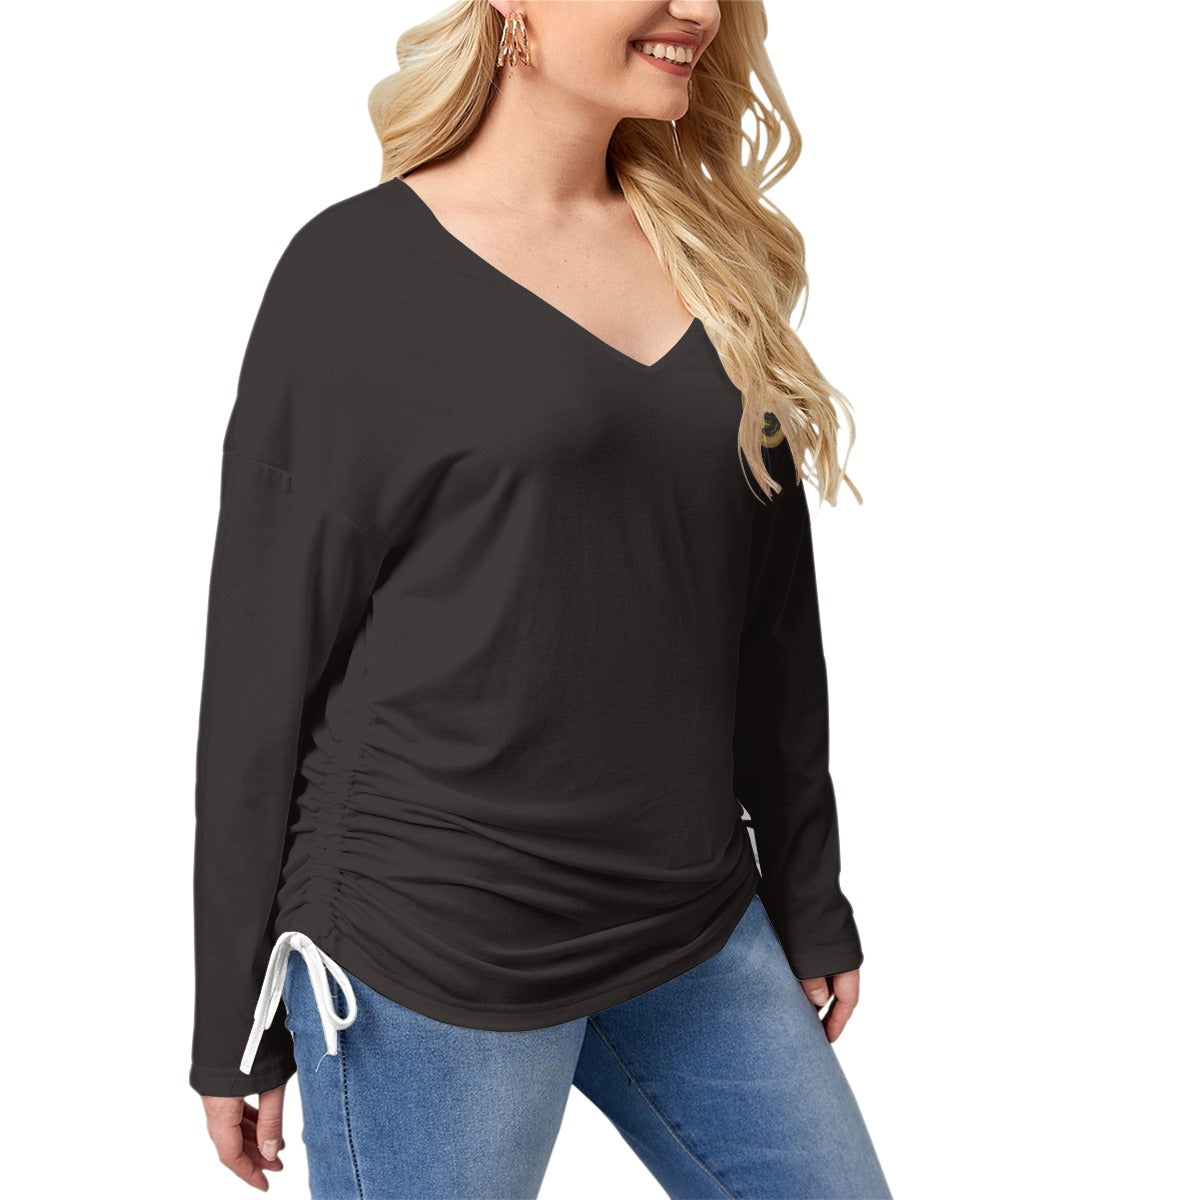 Plus size Yoga Top - Women’s V-neck ZenT-shirt With Side Drawstring - Personal Hour 